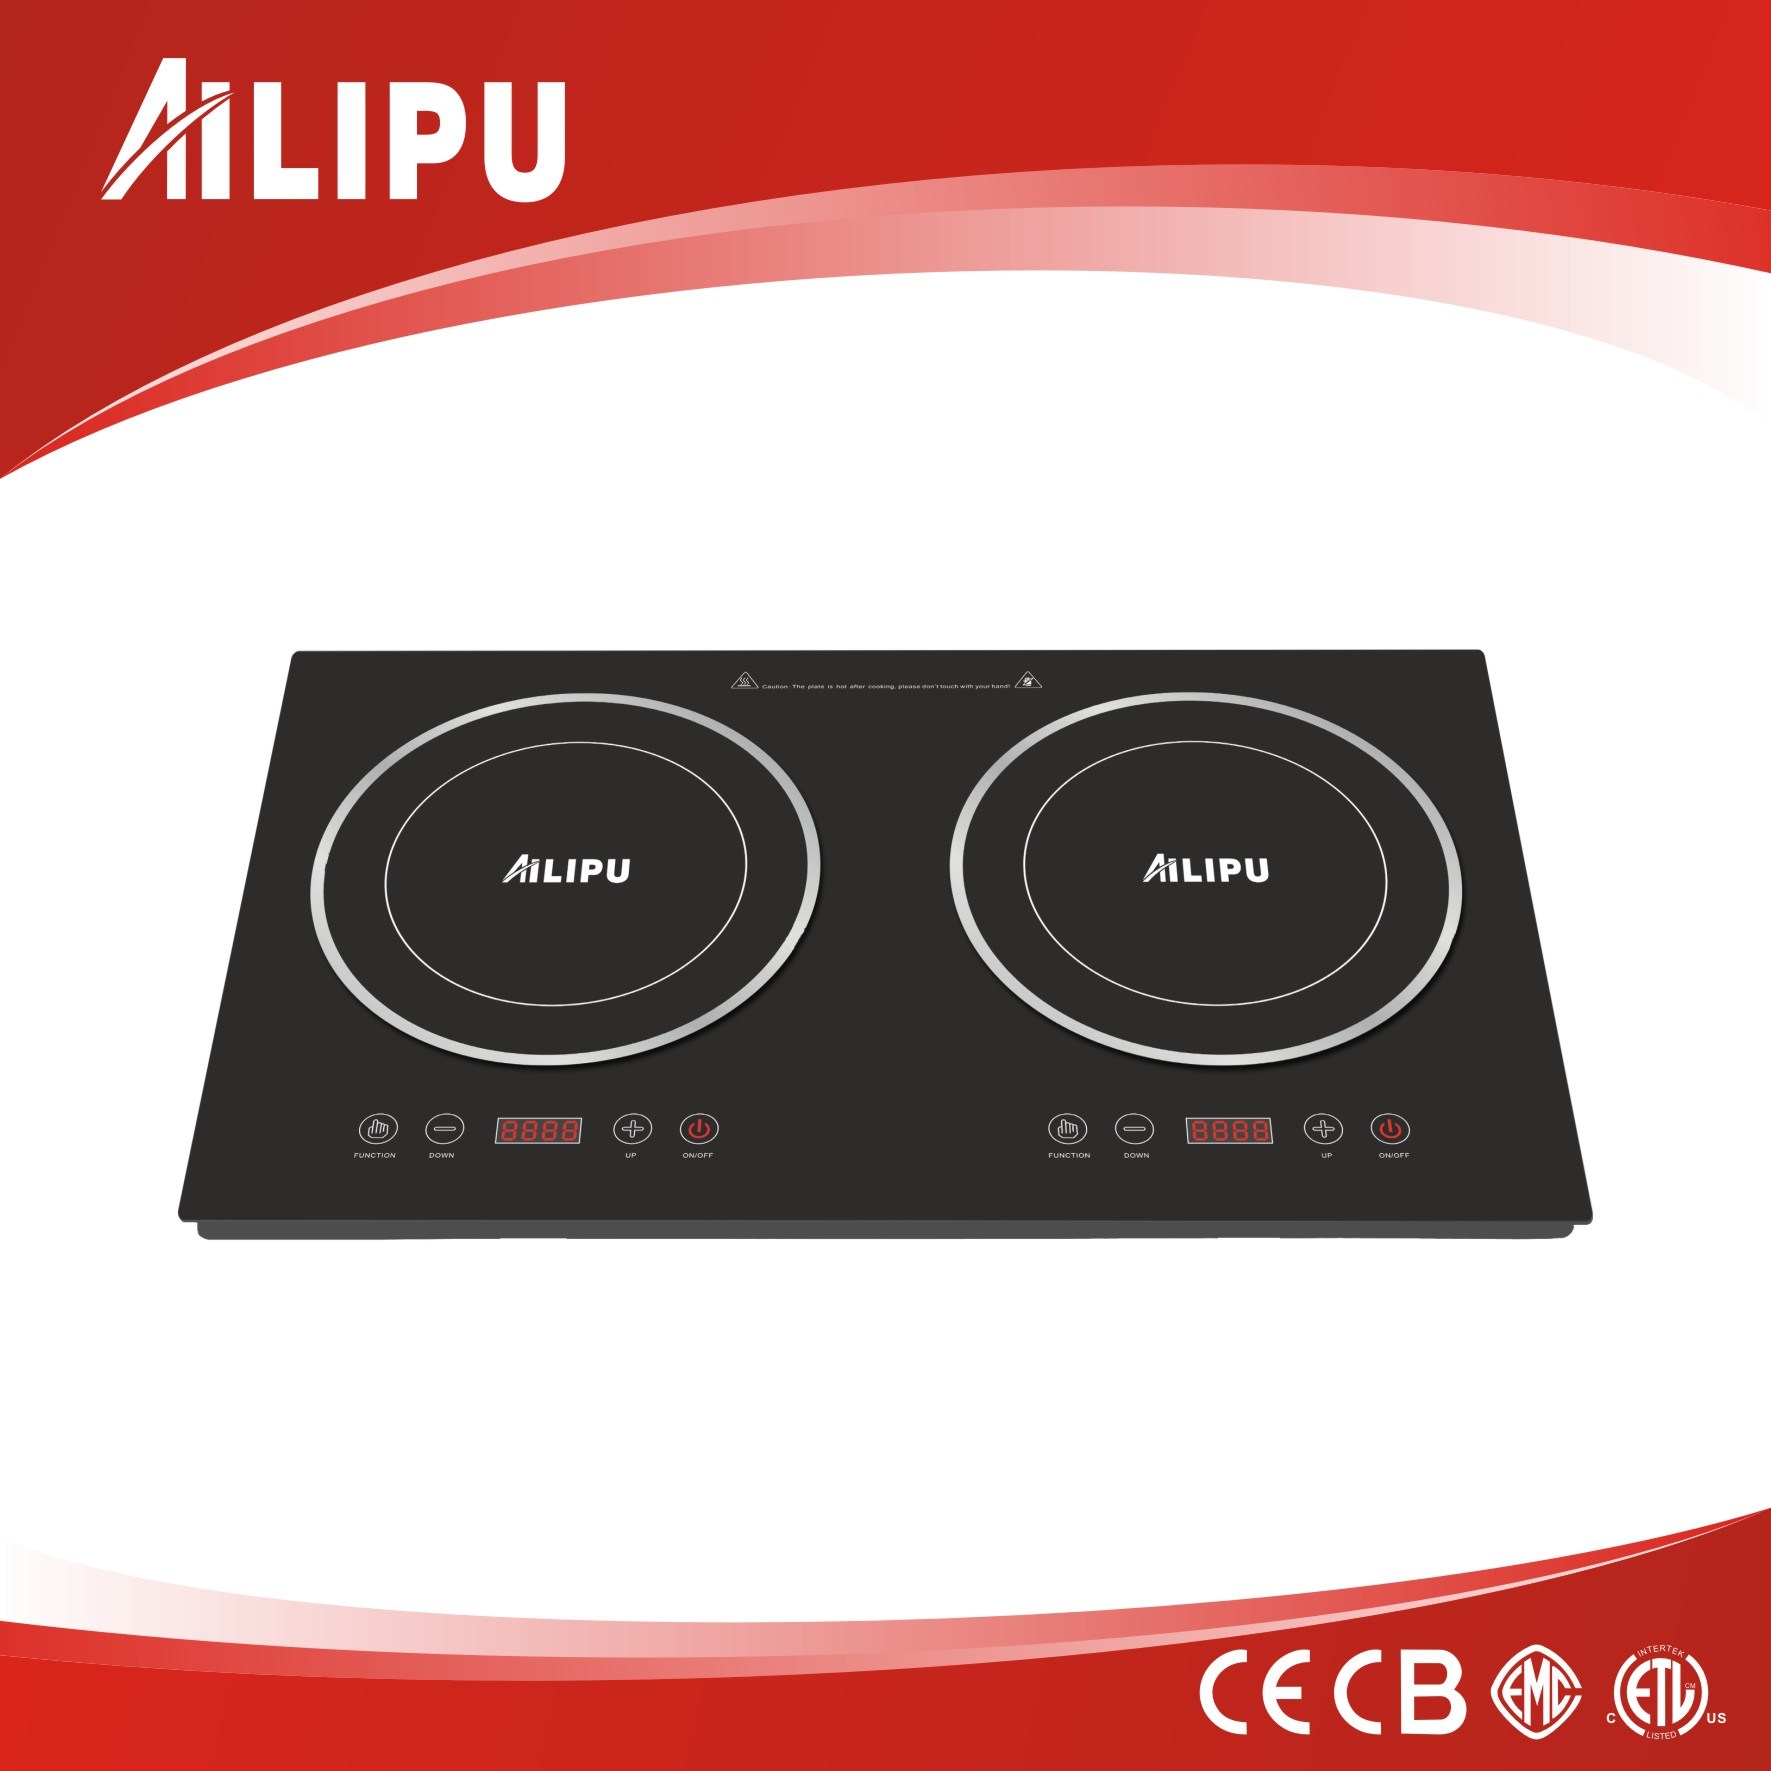 2015 New Applicable Double Induction Cooker, Induction Cooktop with Sensor Touch Control